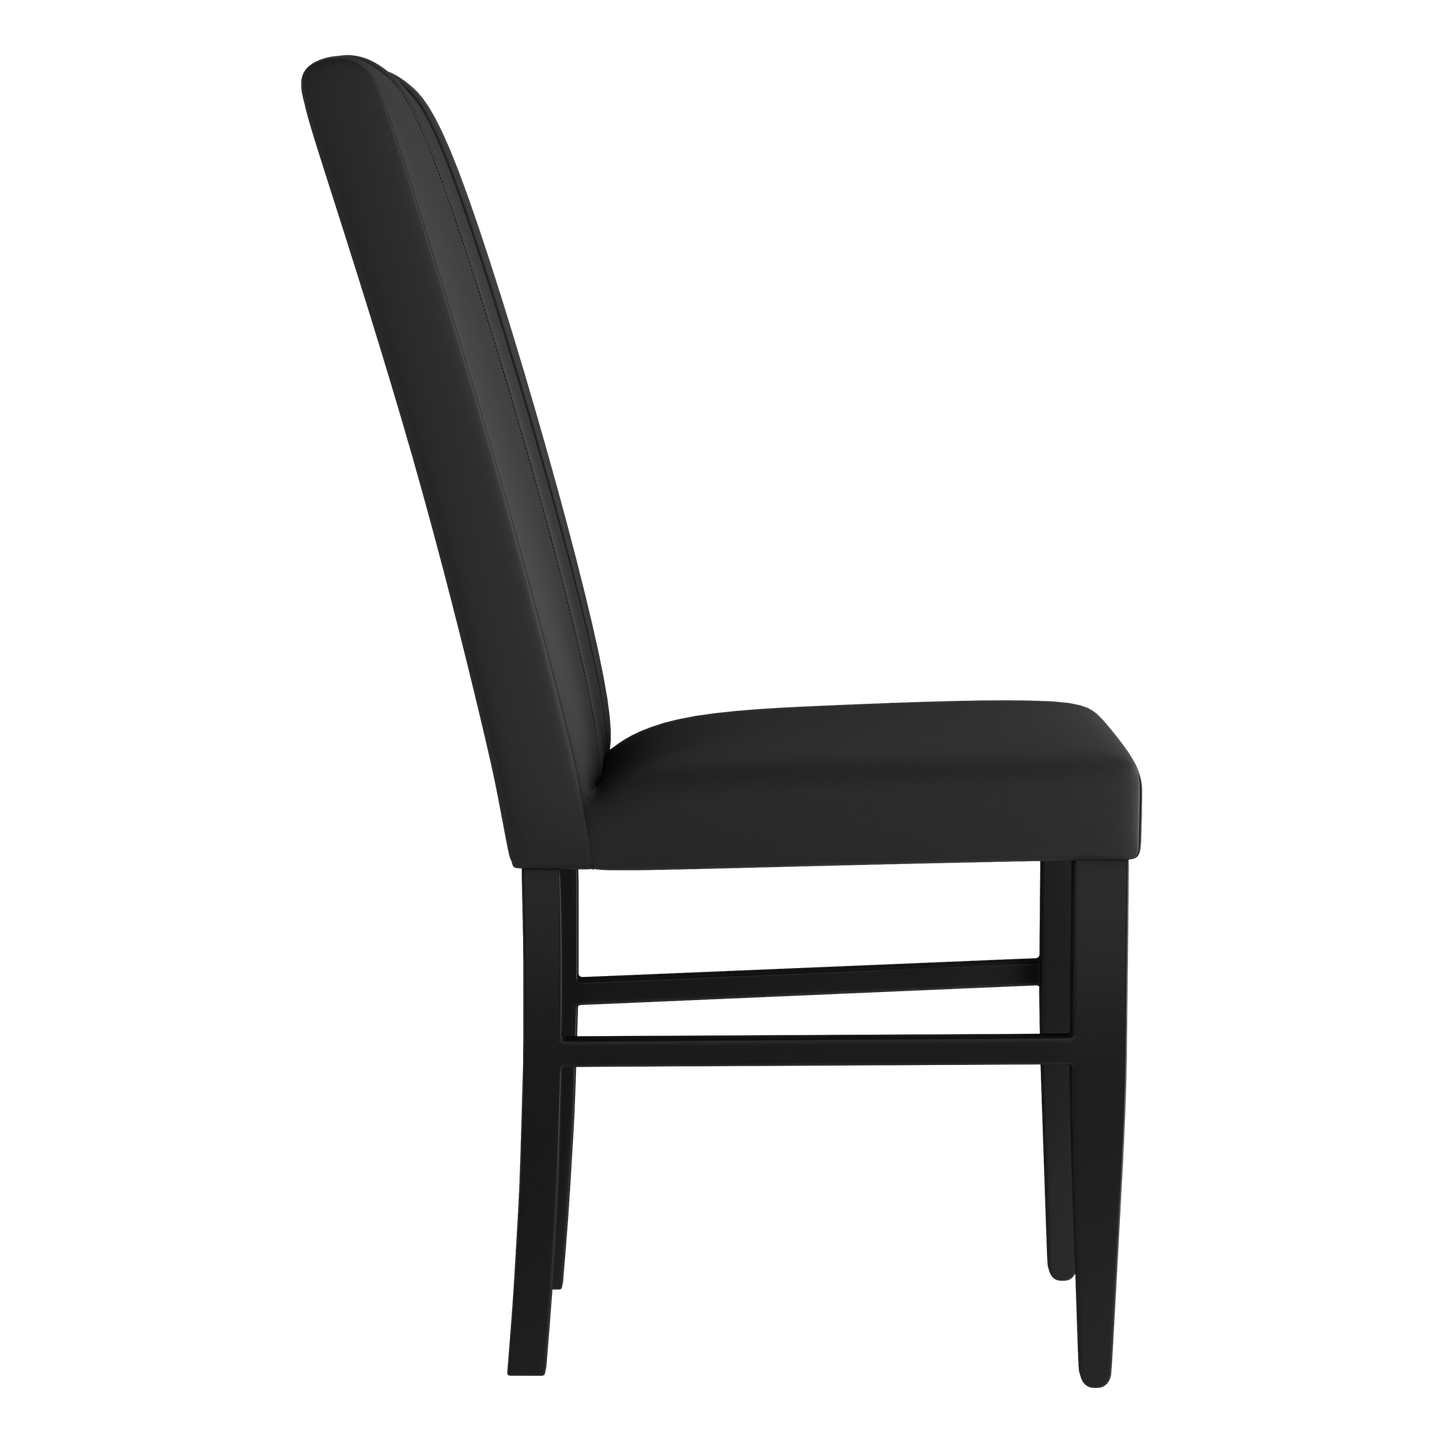 Side Chair 2000 with Vanderbilt Commodores Primary Set of 2